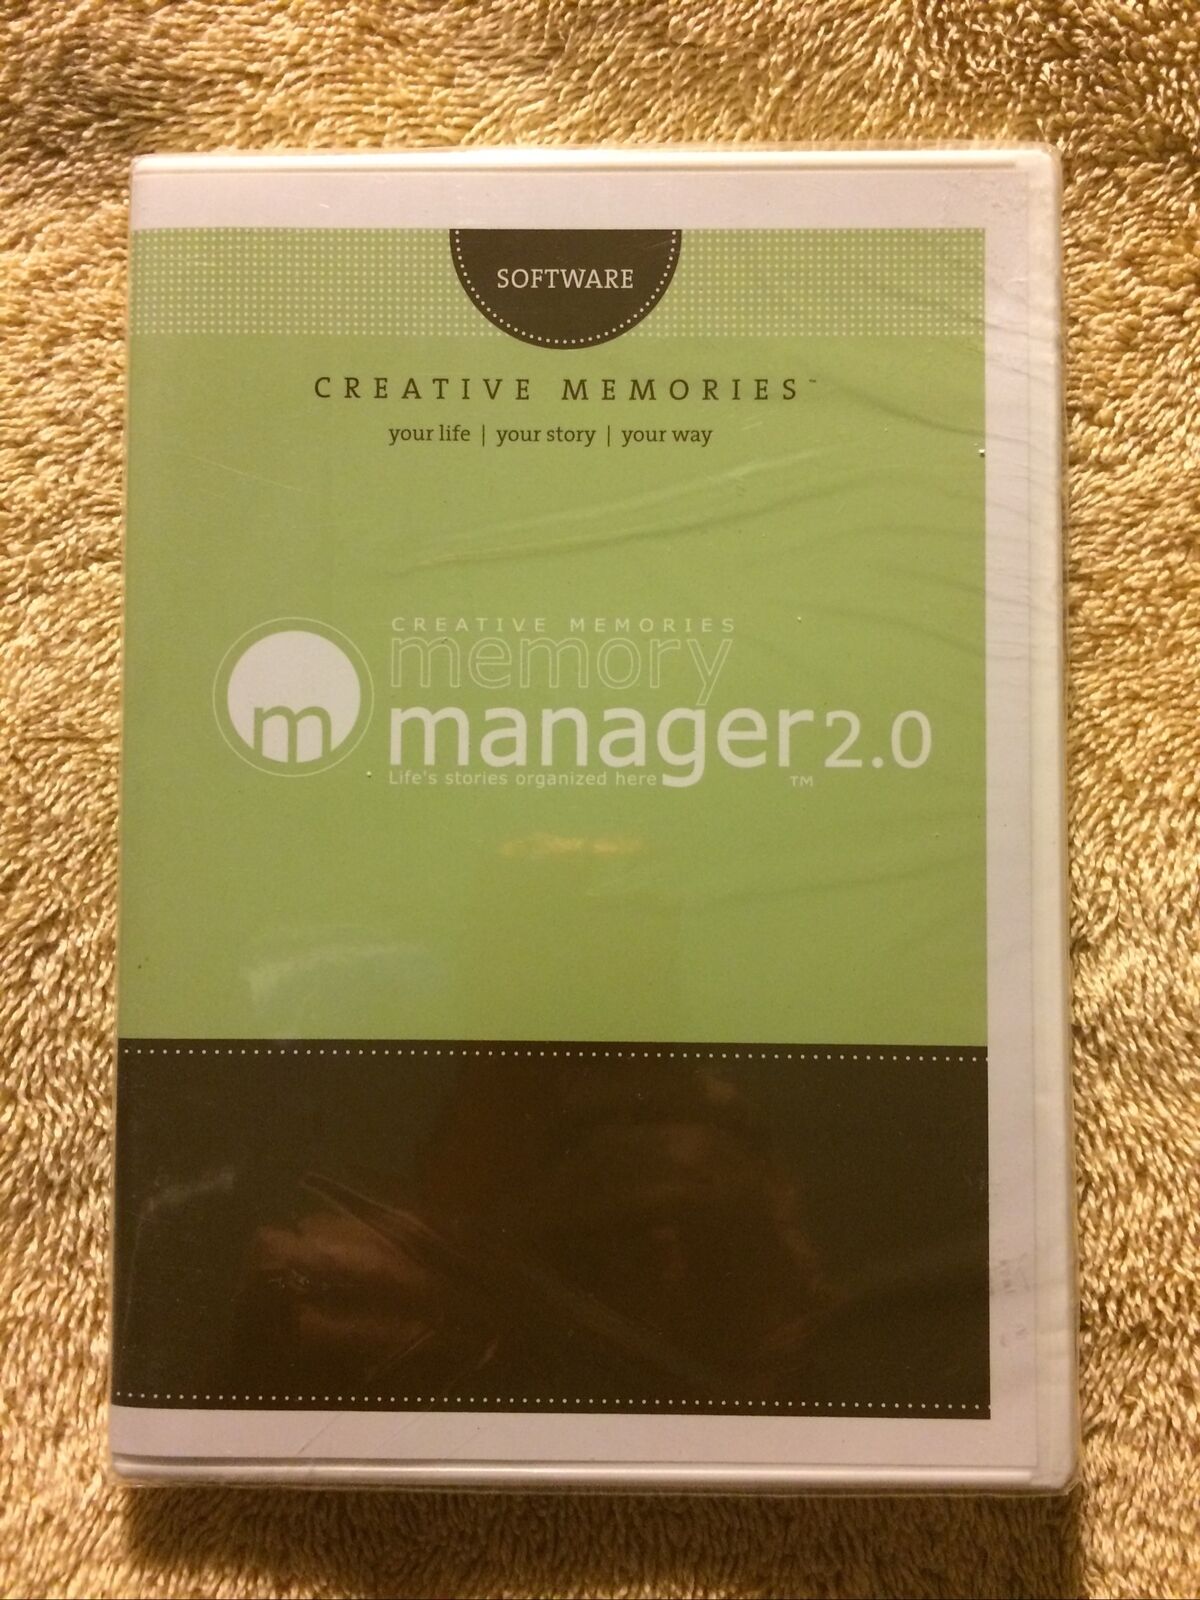 Creative Memories Memory Manager Mail order 2.0 NEW Windows for Gifts BRAND